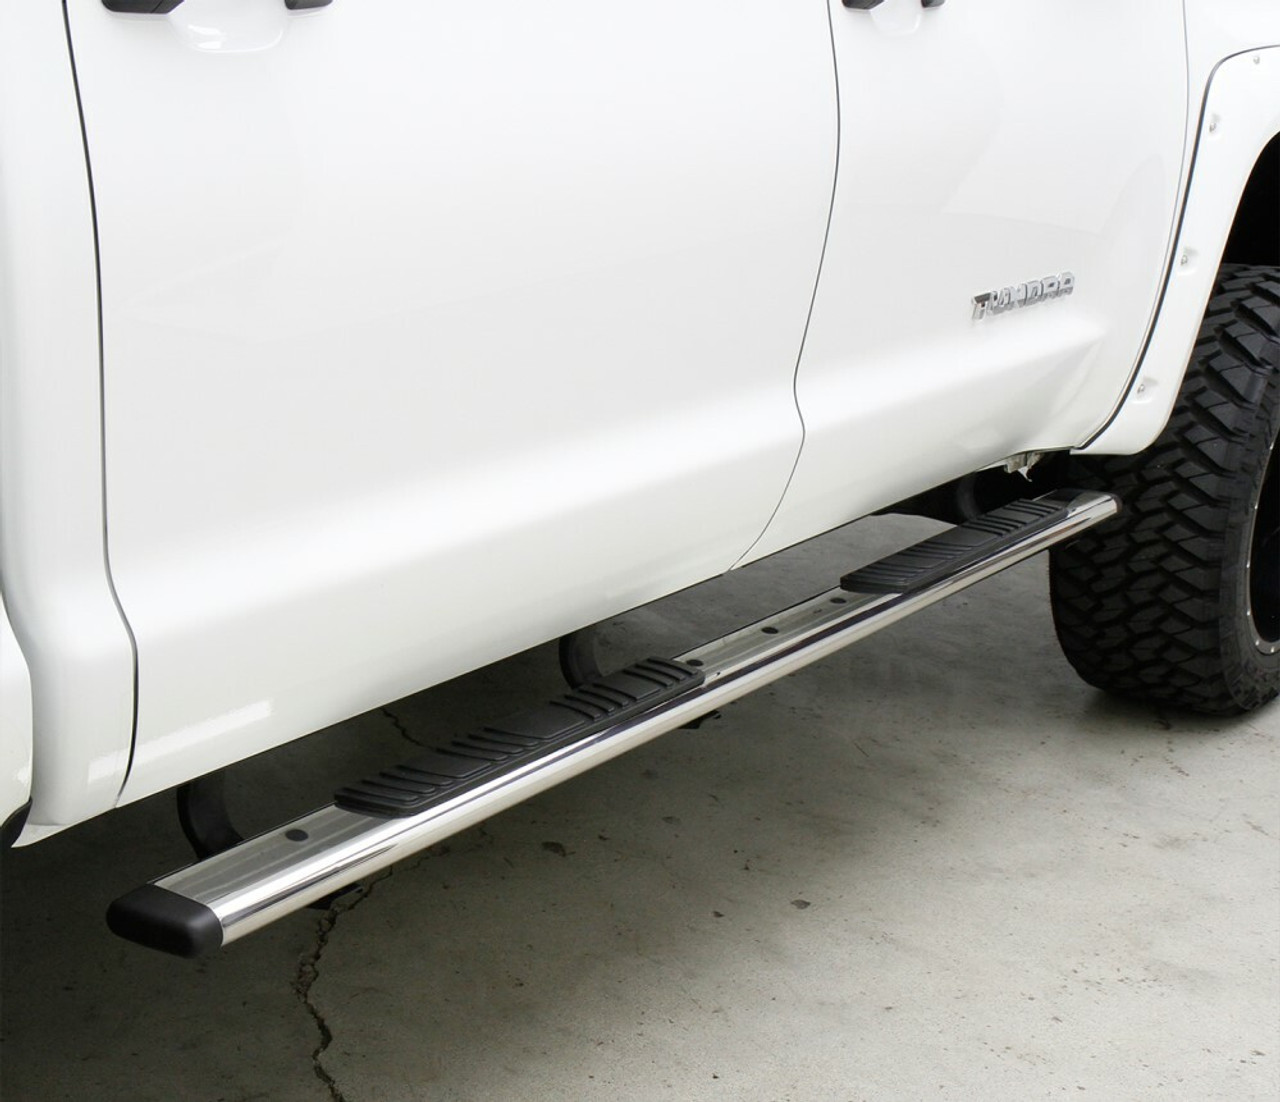 Go Rhino 685418080PS Ford, F-250, F-350 Super Duty, 1999 - 2016, 5 inch OE Xtreme Low Profile - Complete Kit: Sidesteps + Brackets, Stainless steel, Polished, 650080PS side bars + 6841805 OE Xtreme Brackets. 5 inch wide x 80 inch long side bars